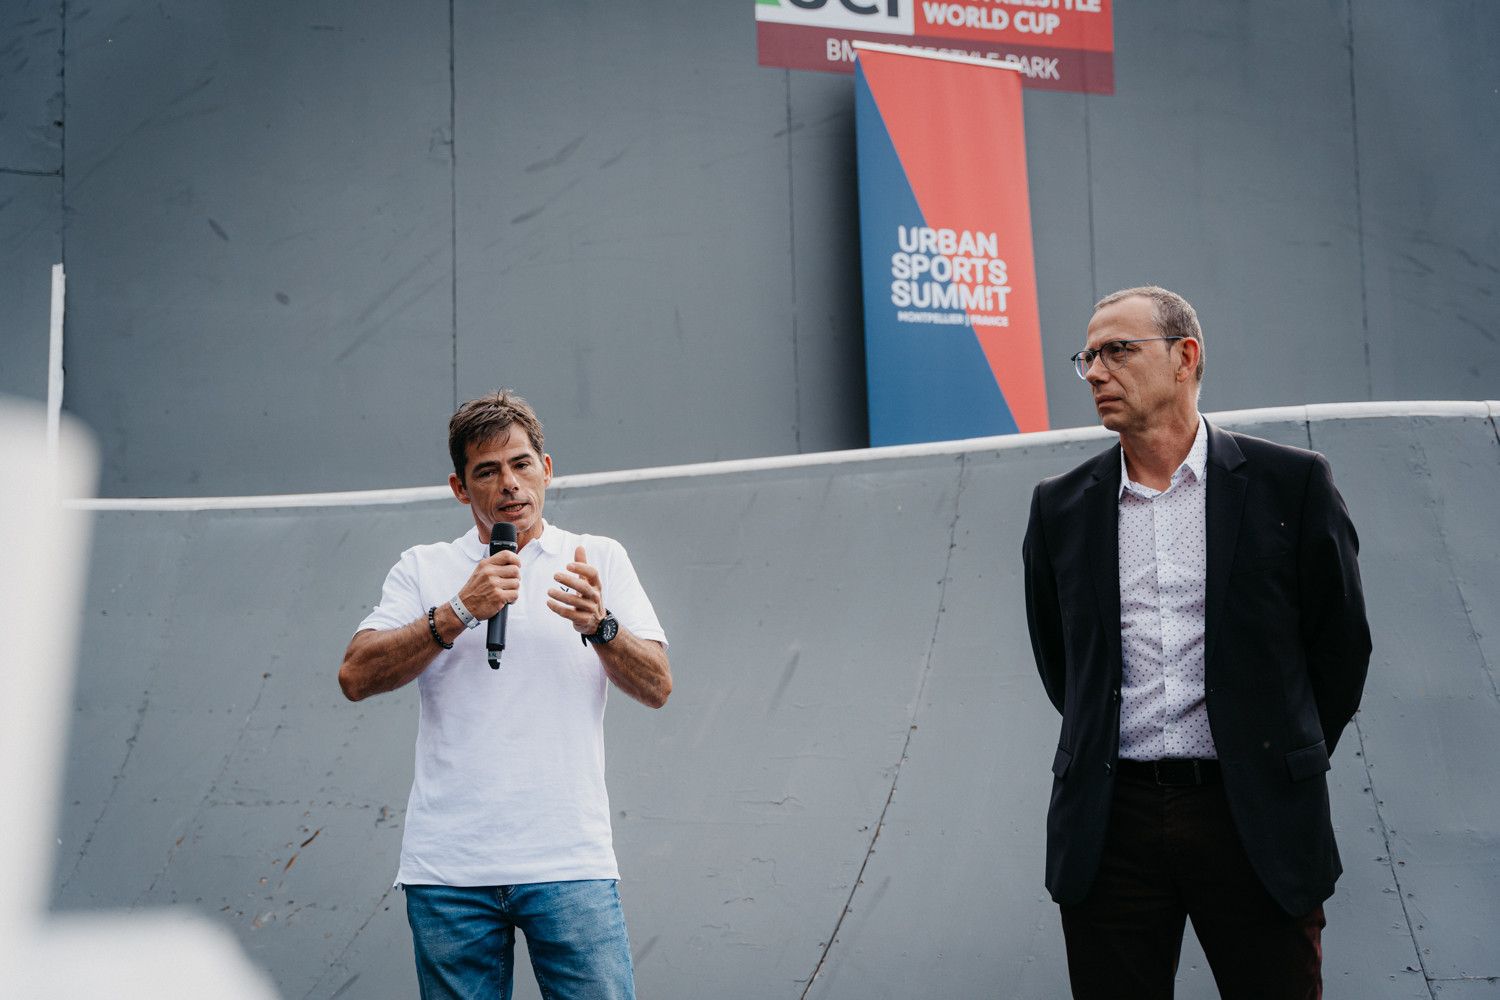 Hervé André-Benoît, left, founder of the FISE, which is running parallel to the Urban Sport Summit, hopes it can generate more exposure and revenue for urban sports ©Hurricane - FISE